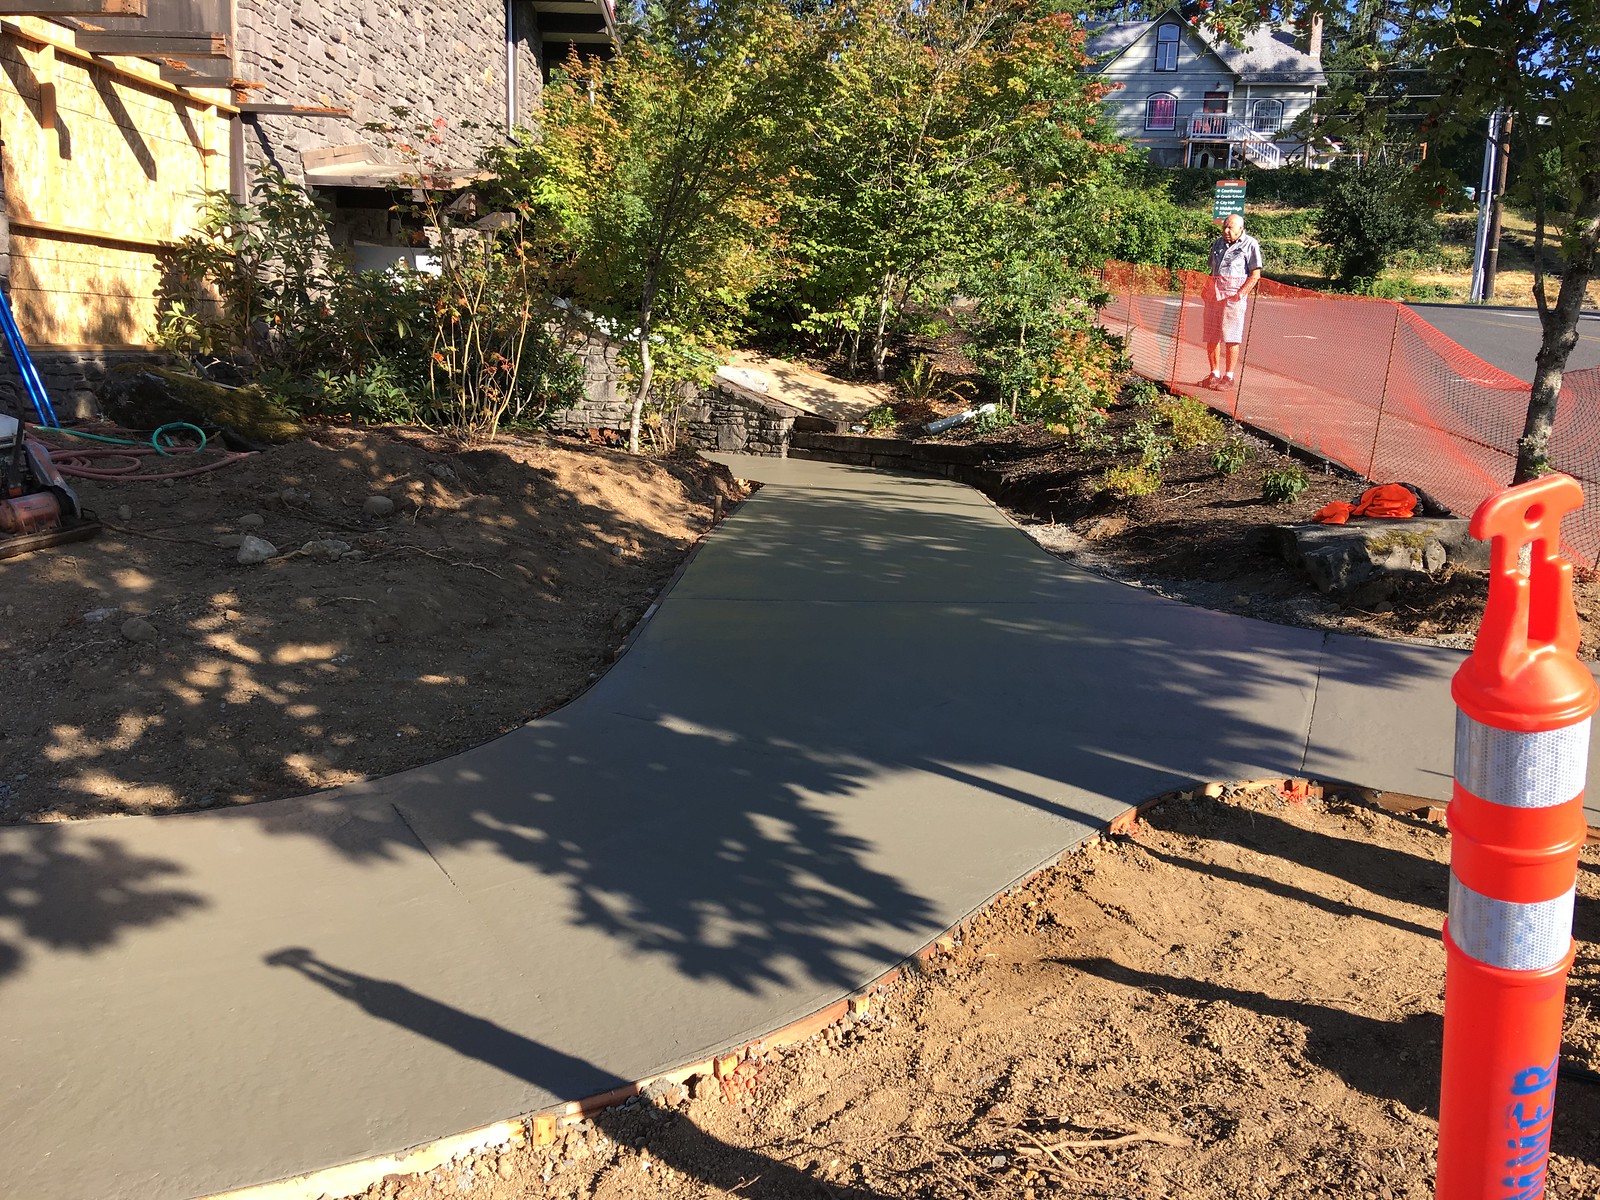 August 16, 2017--The new walkway at Stevenson Community Library